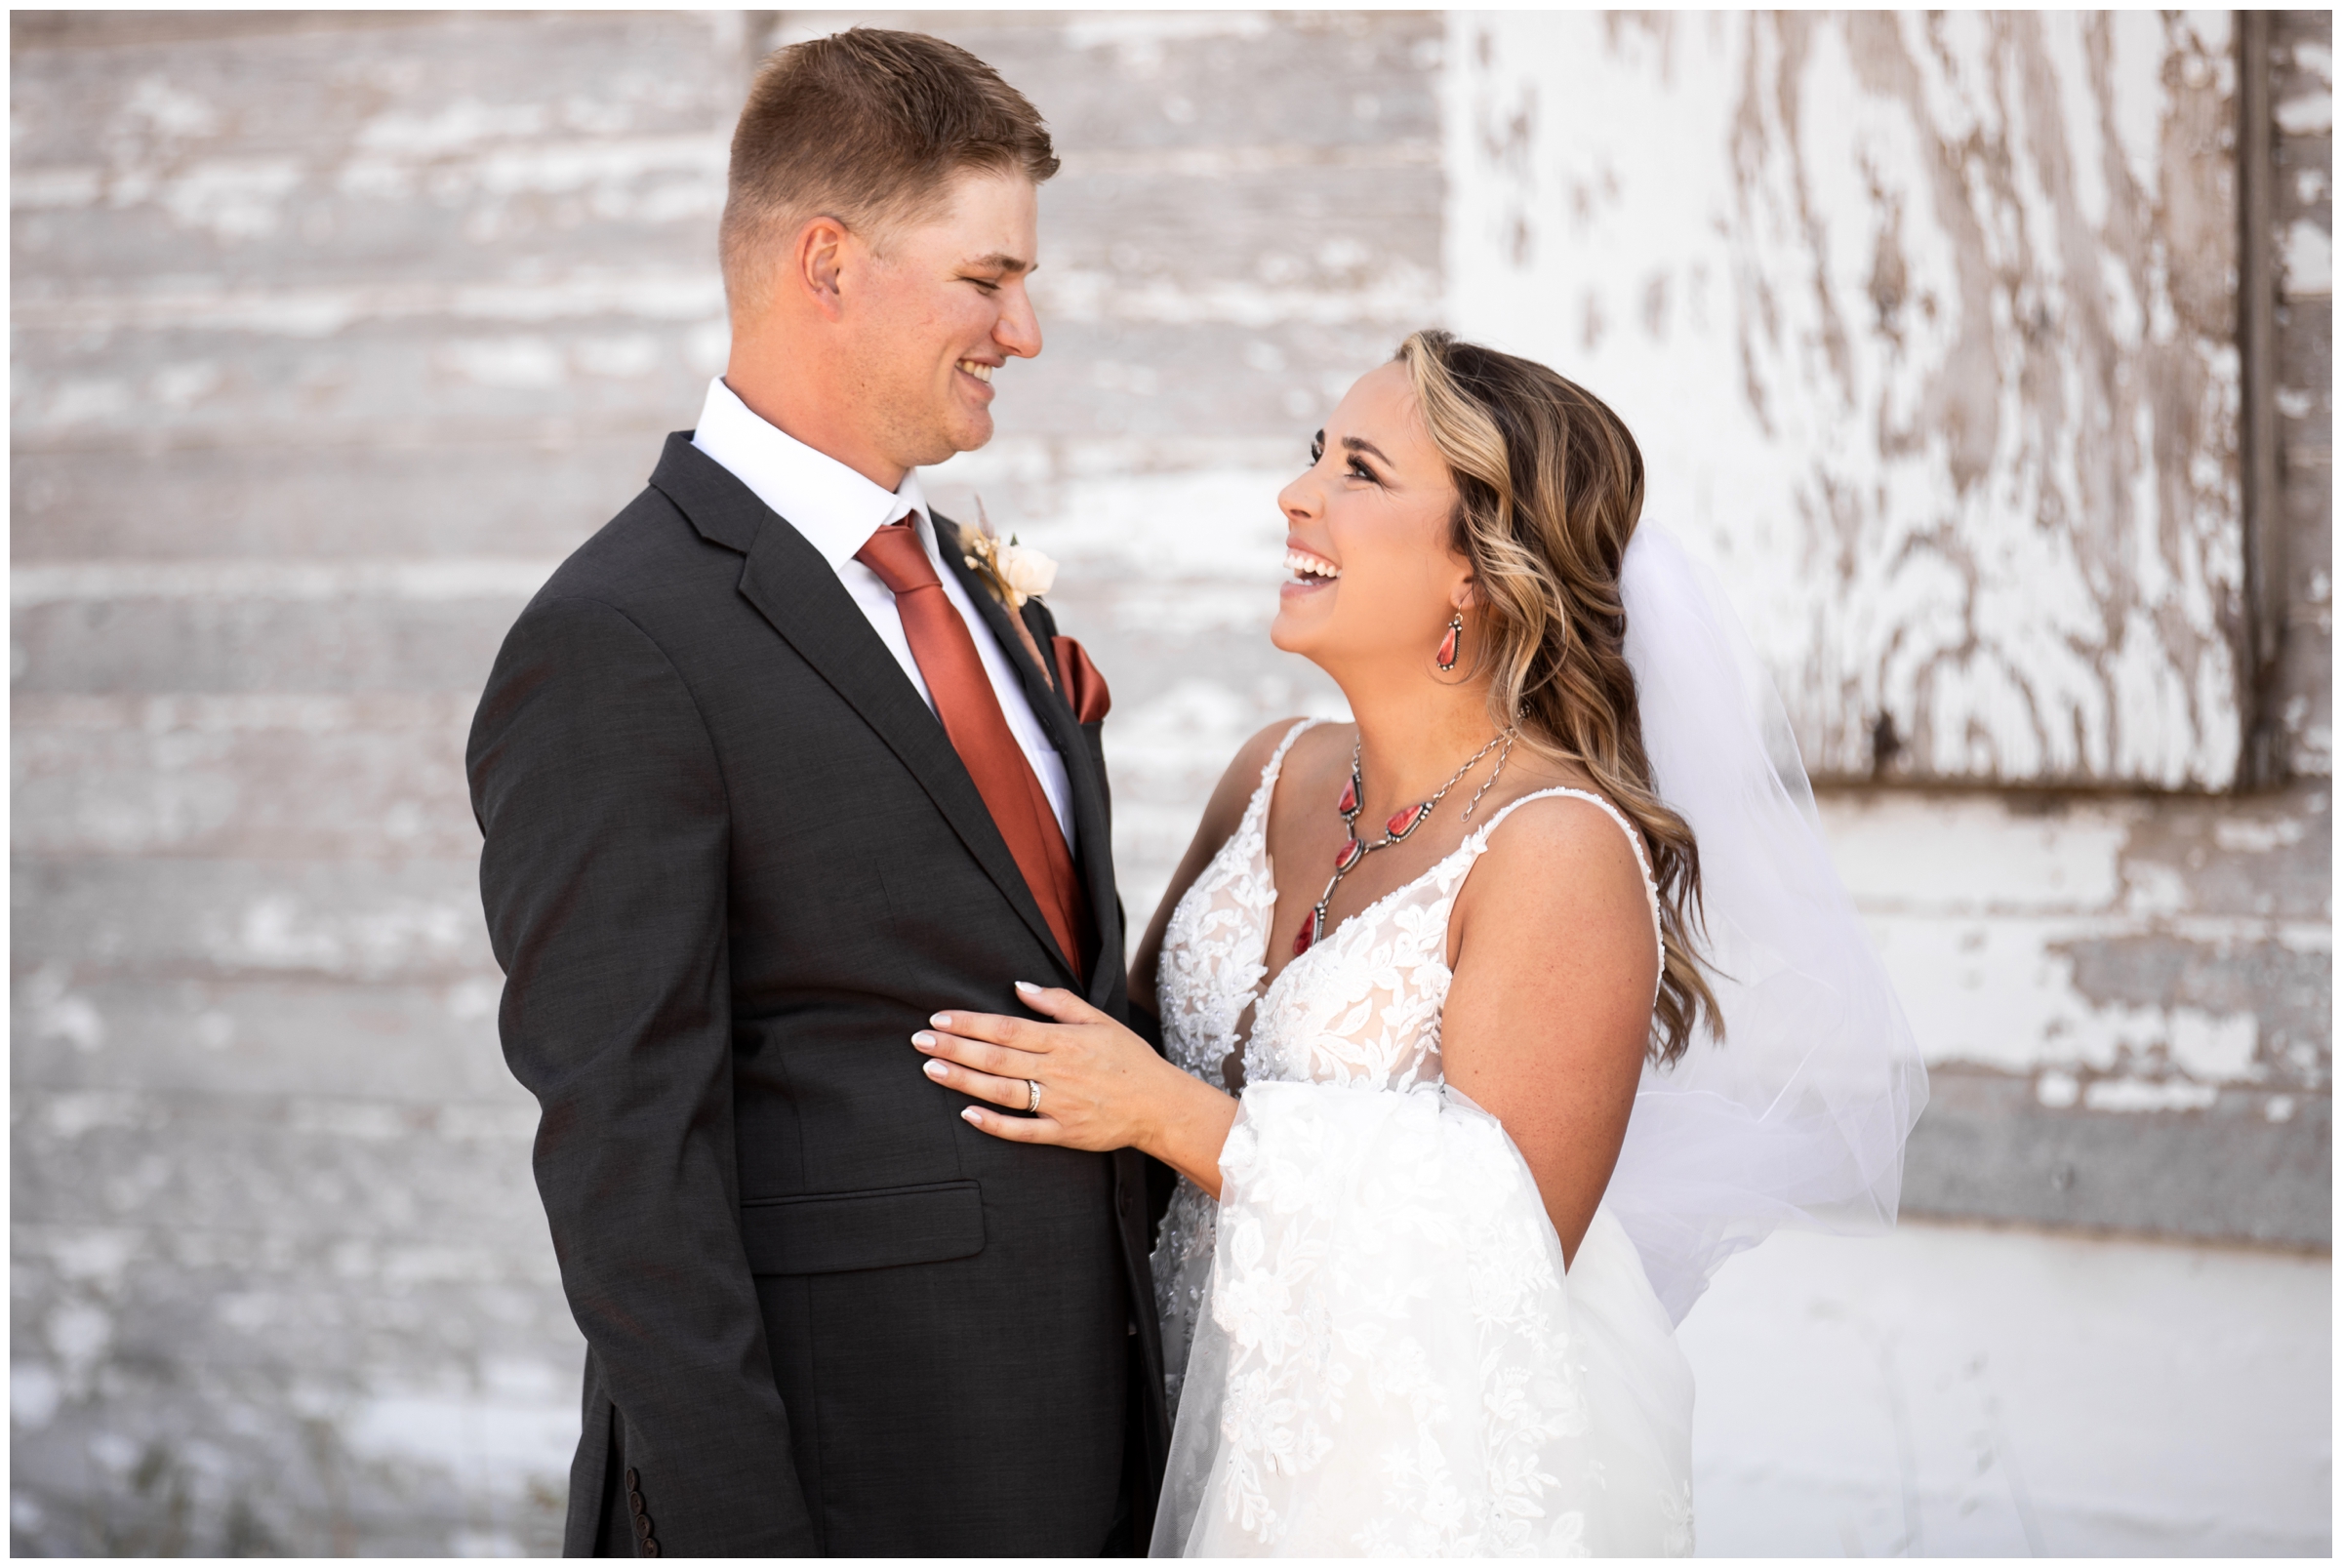 candid wedding photography in Northern Colorado by Plum Pretty photography 